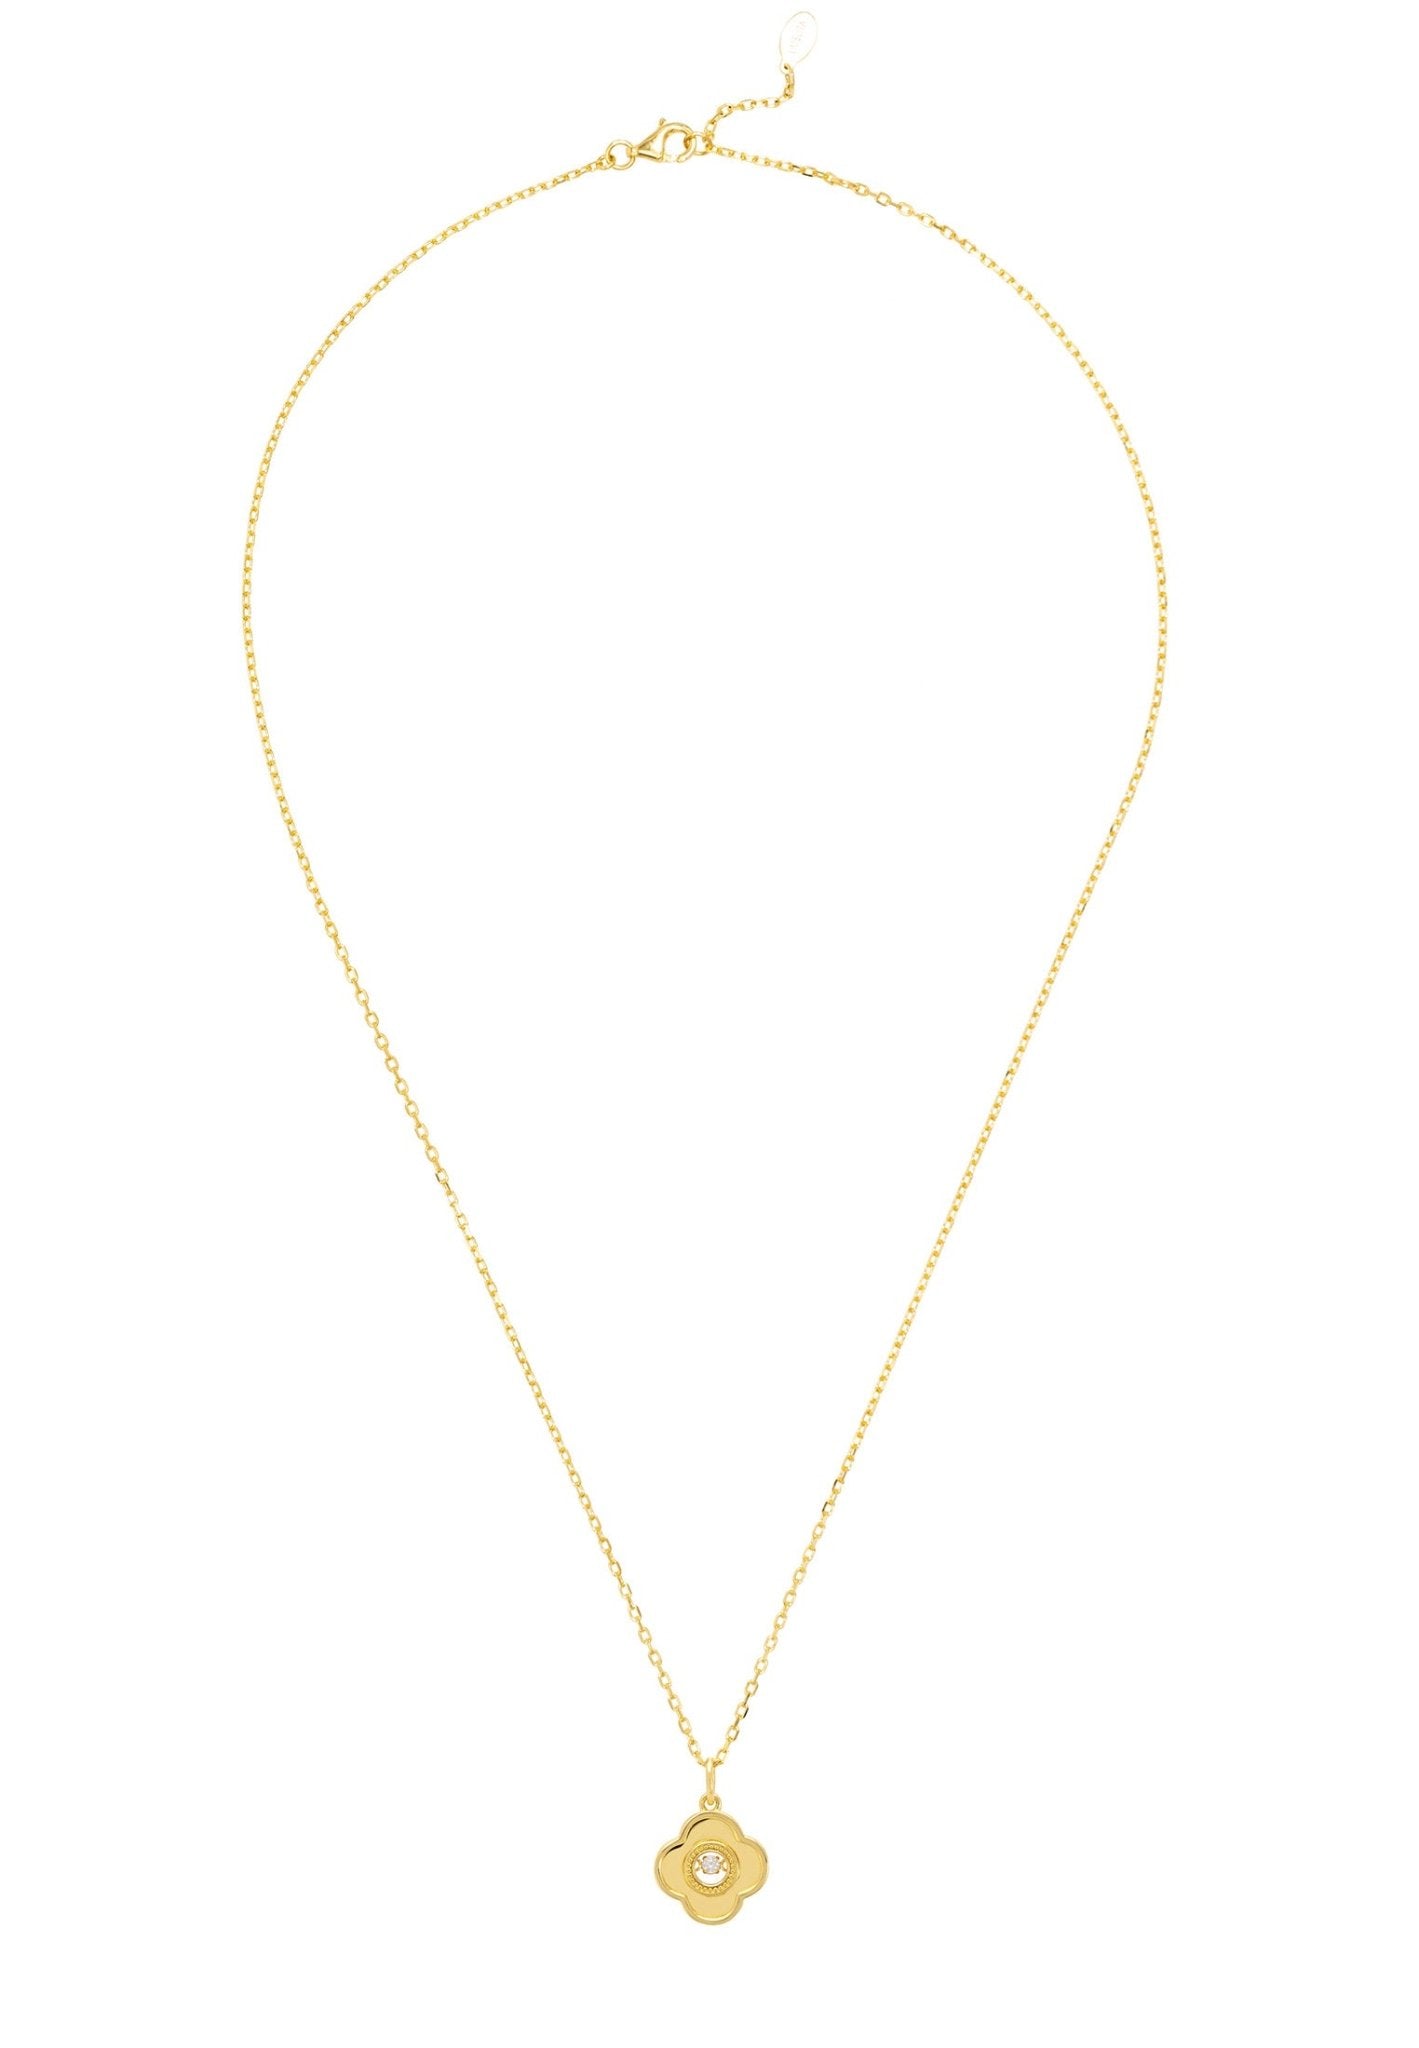 Clover Floating Stone Necklace Gold - LATELITA Necklaces